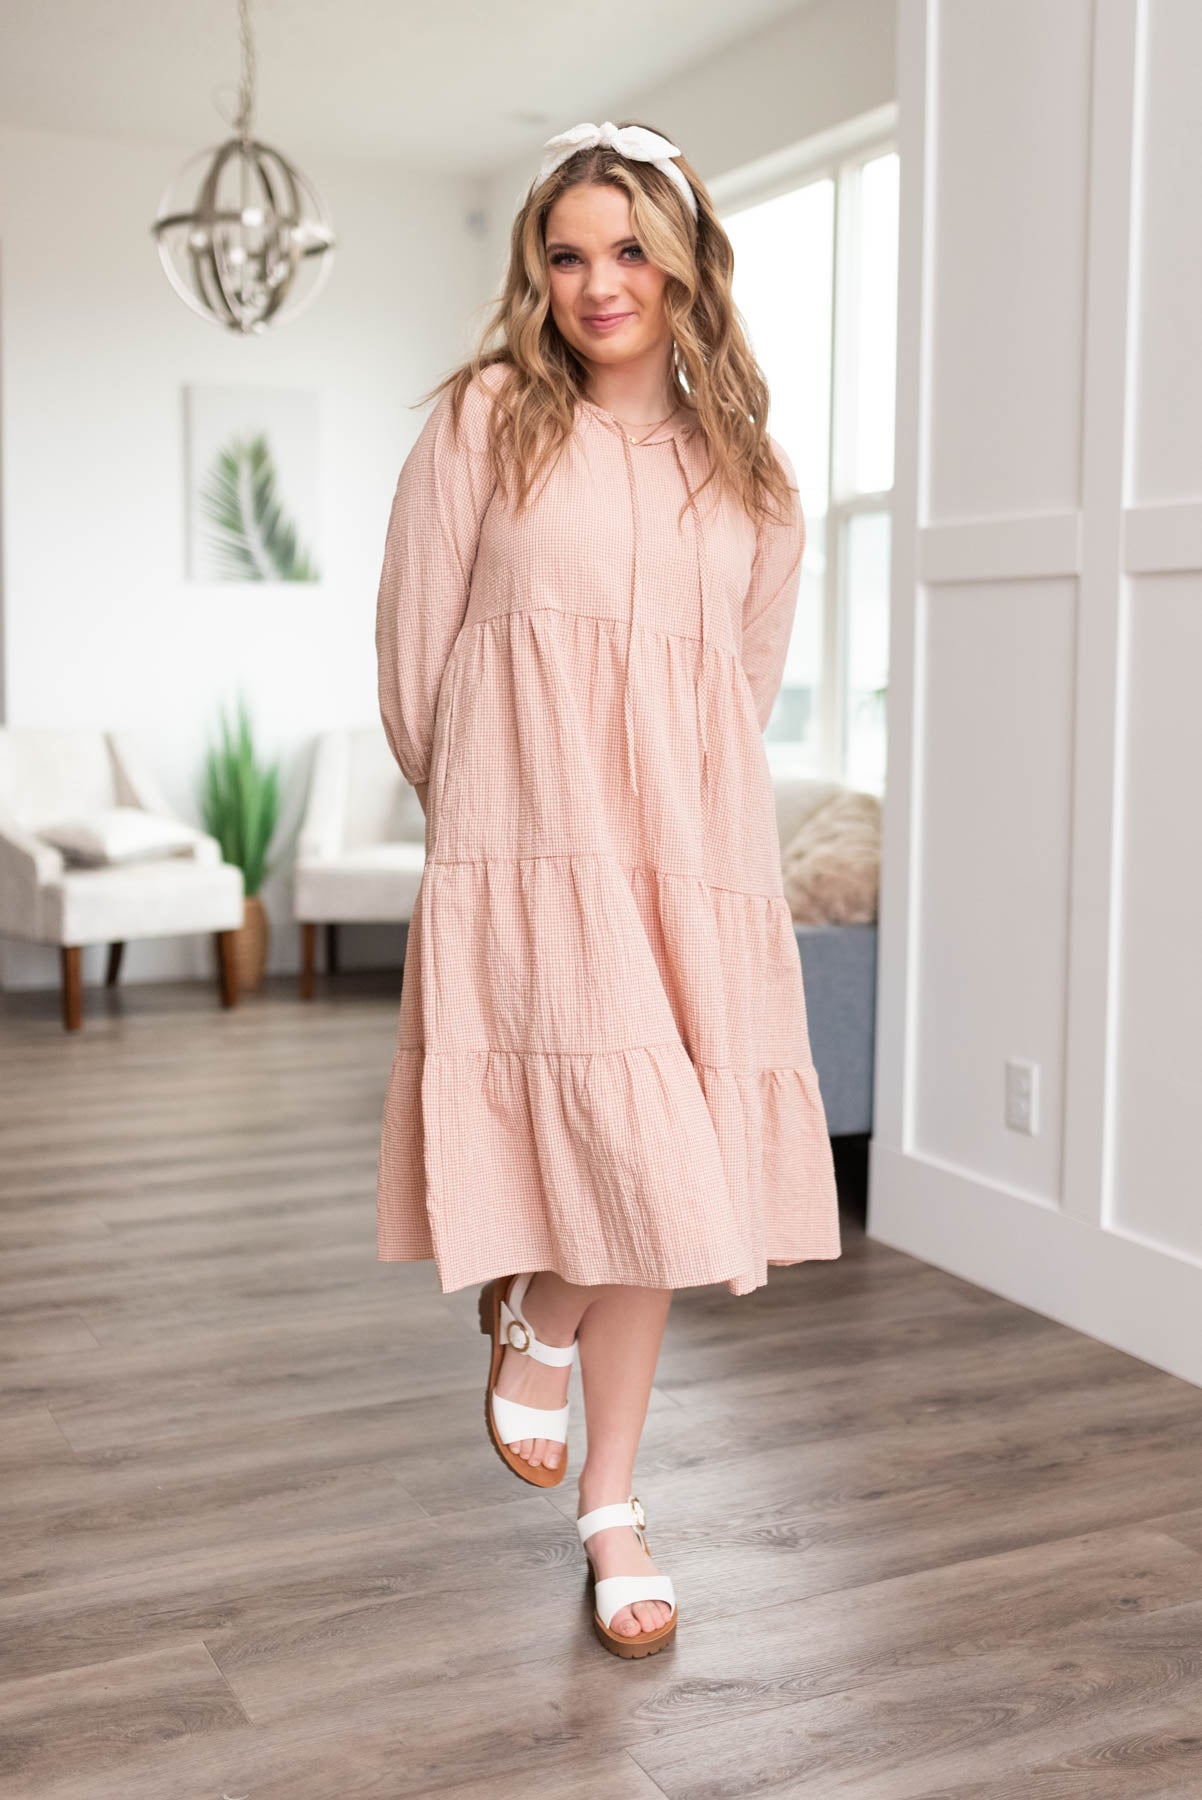 Blush tiered dress with long sleeves